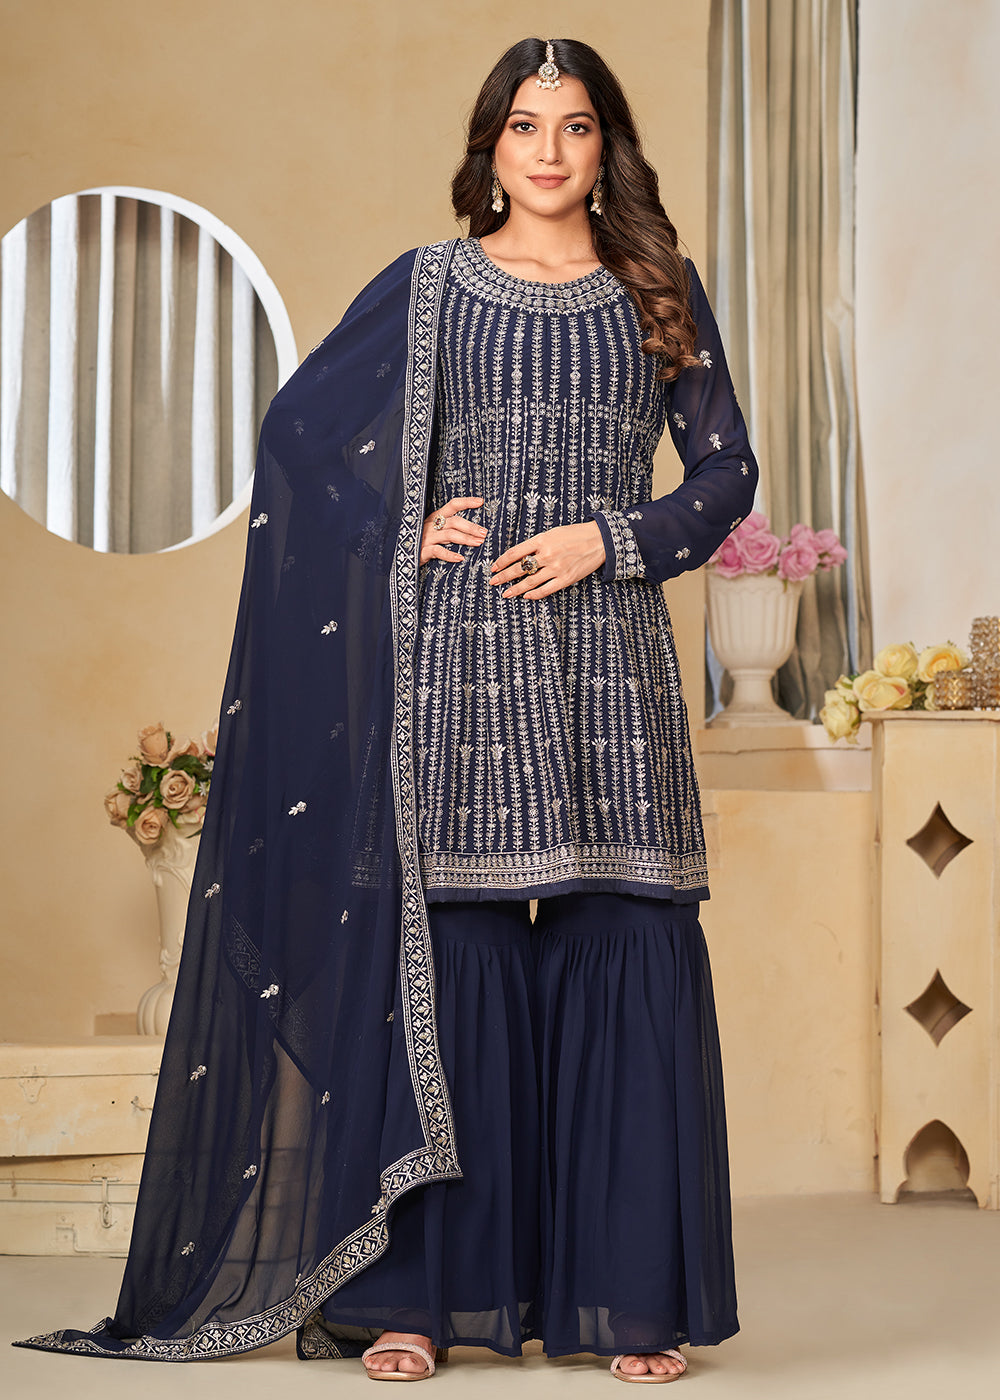 Shop Now Faux Georgette Blue Embroidered Gharara Style Suit Online at Empress Clothing in USA, UK, Canada, Italy & Worldwide.